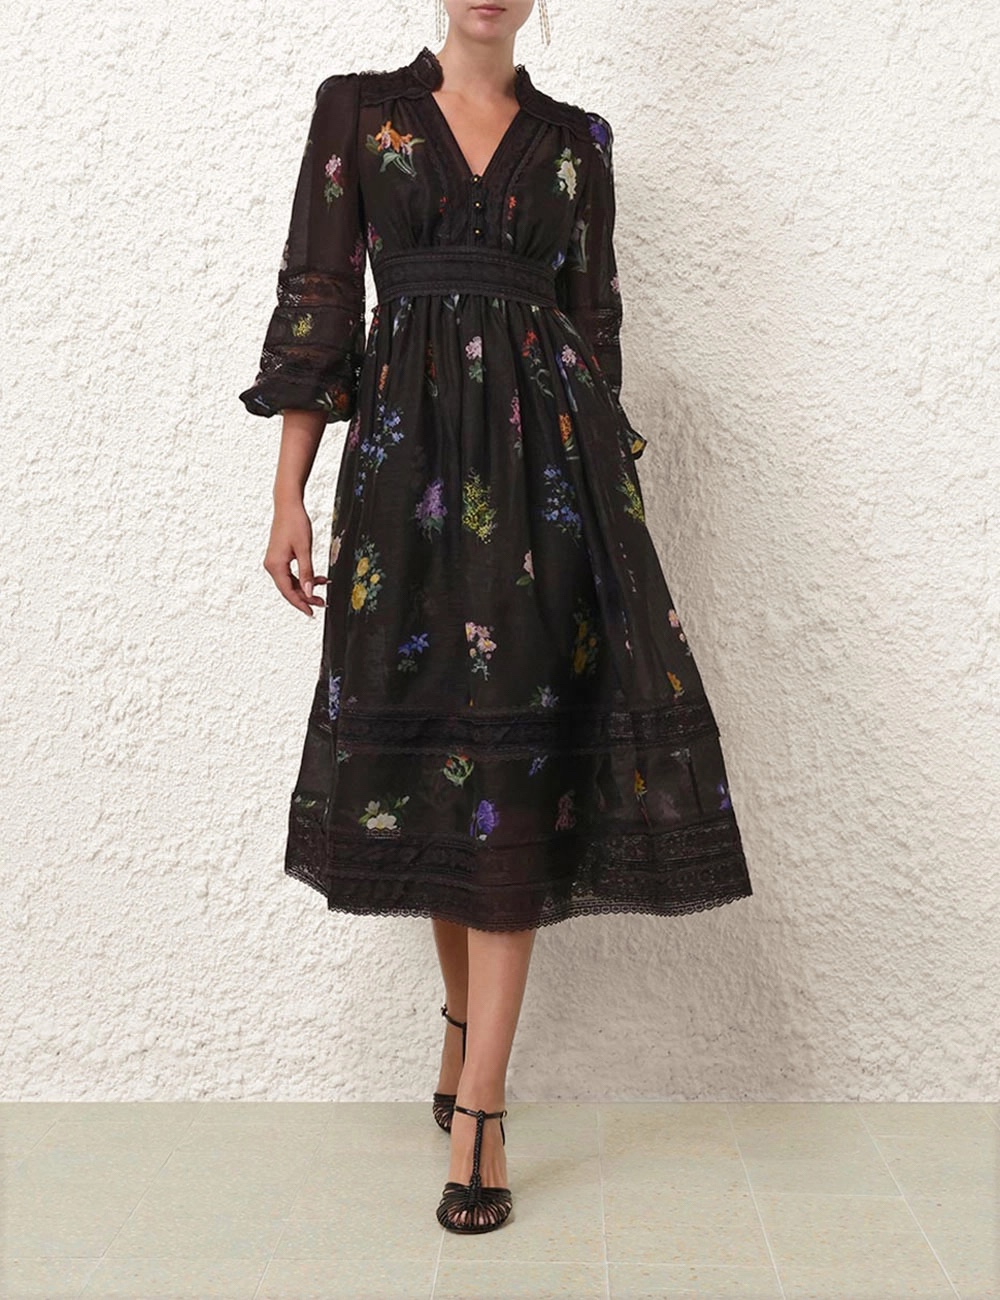 Zimmermann Clothing Dresses Splicing Lace Spring/Summer Collection